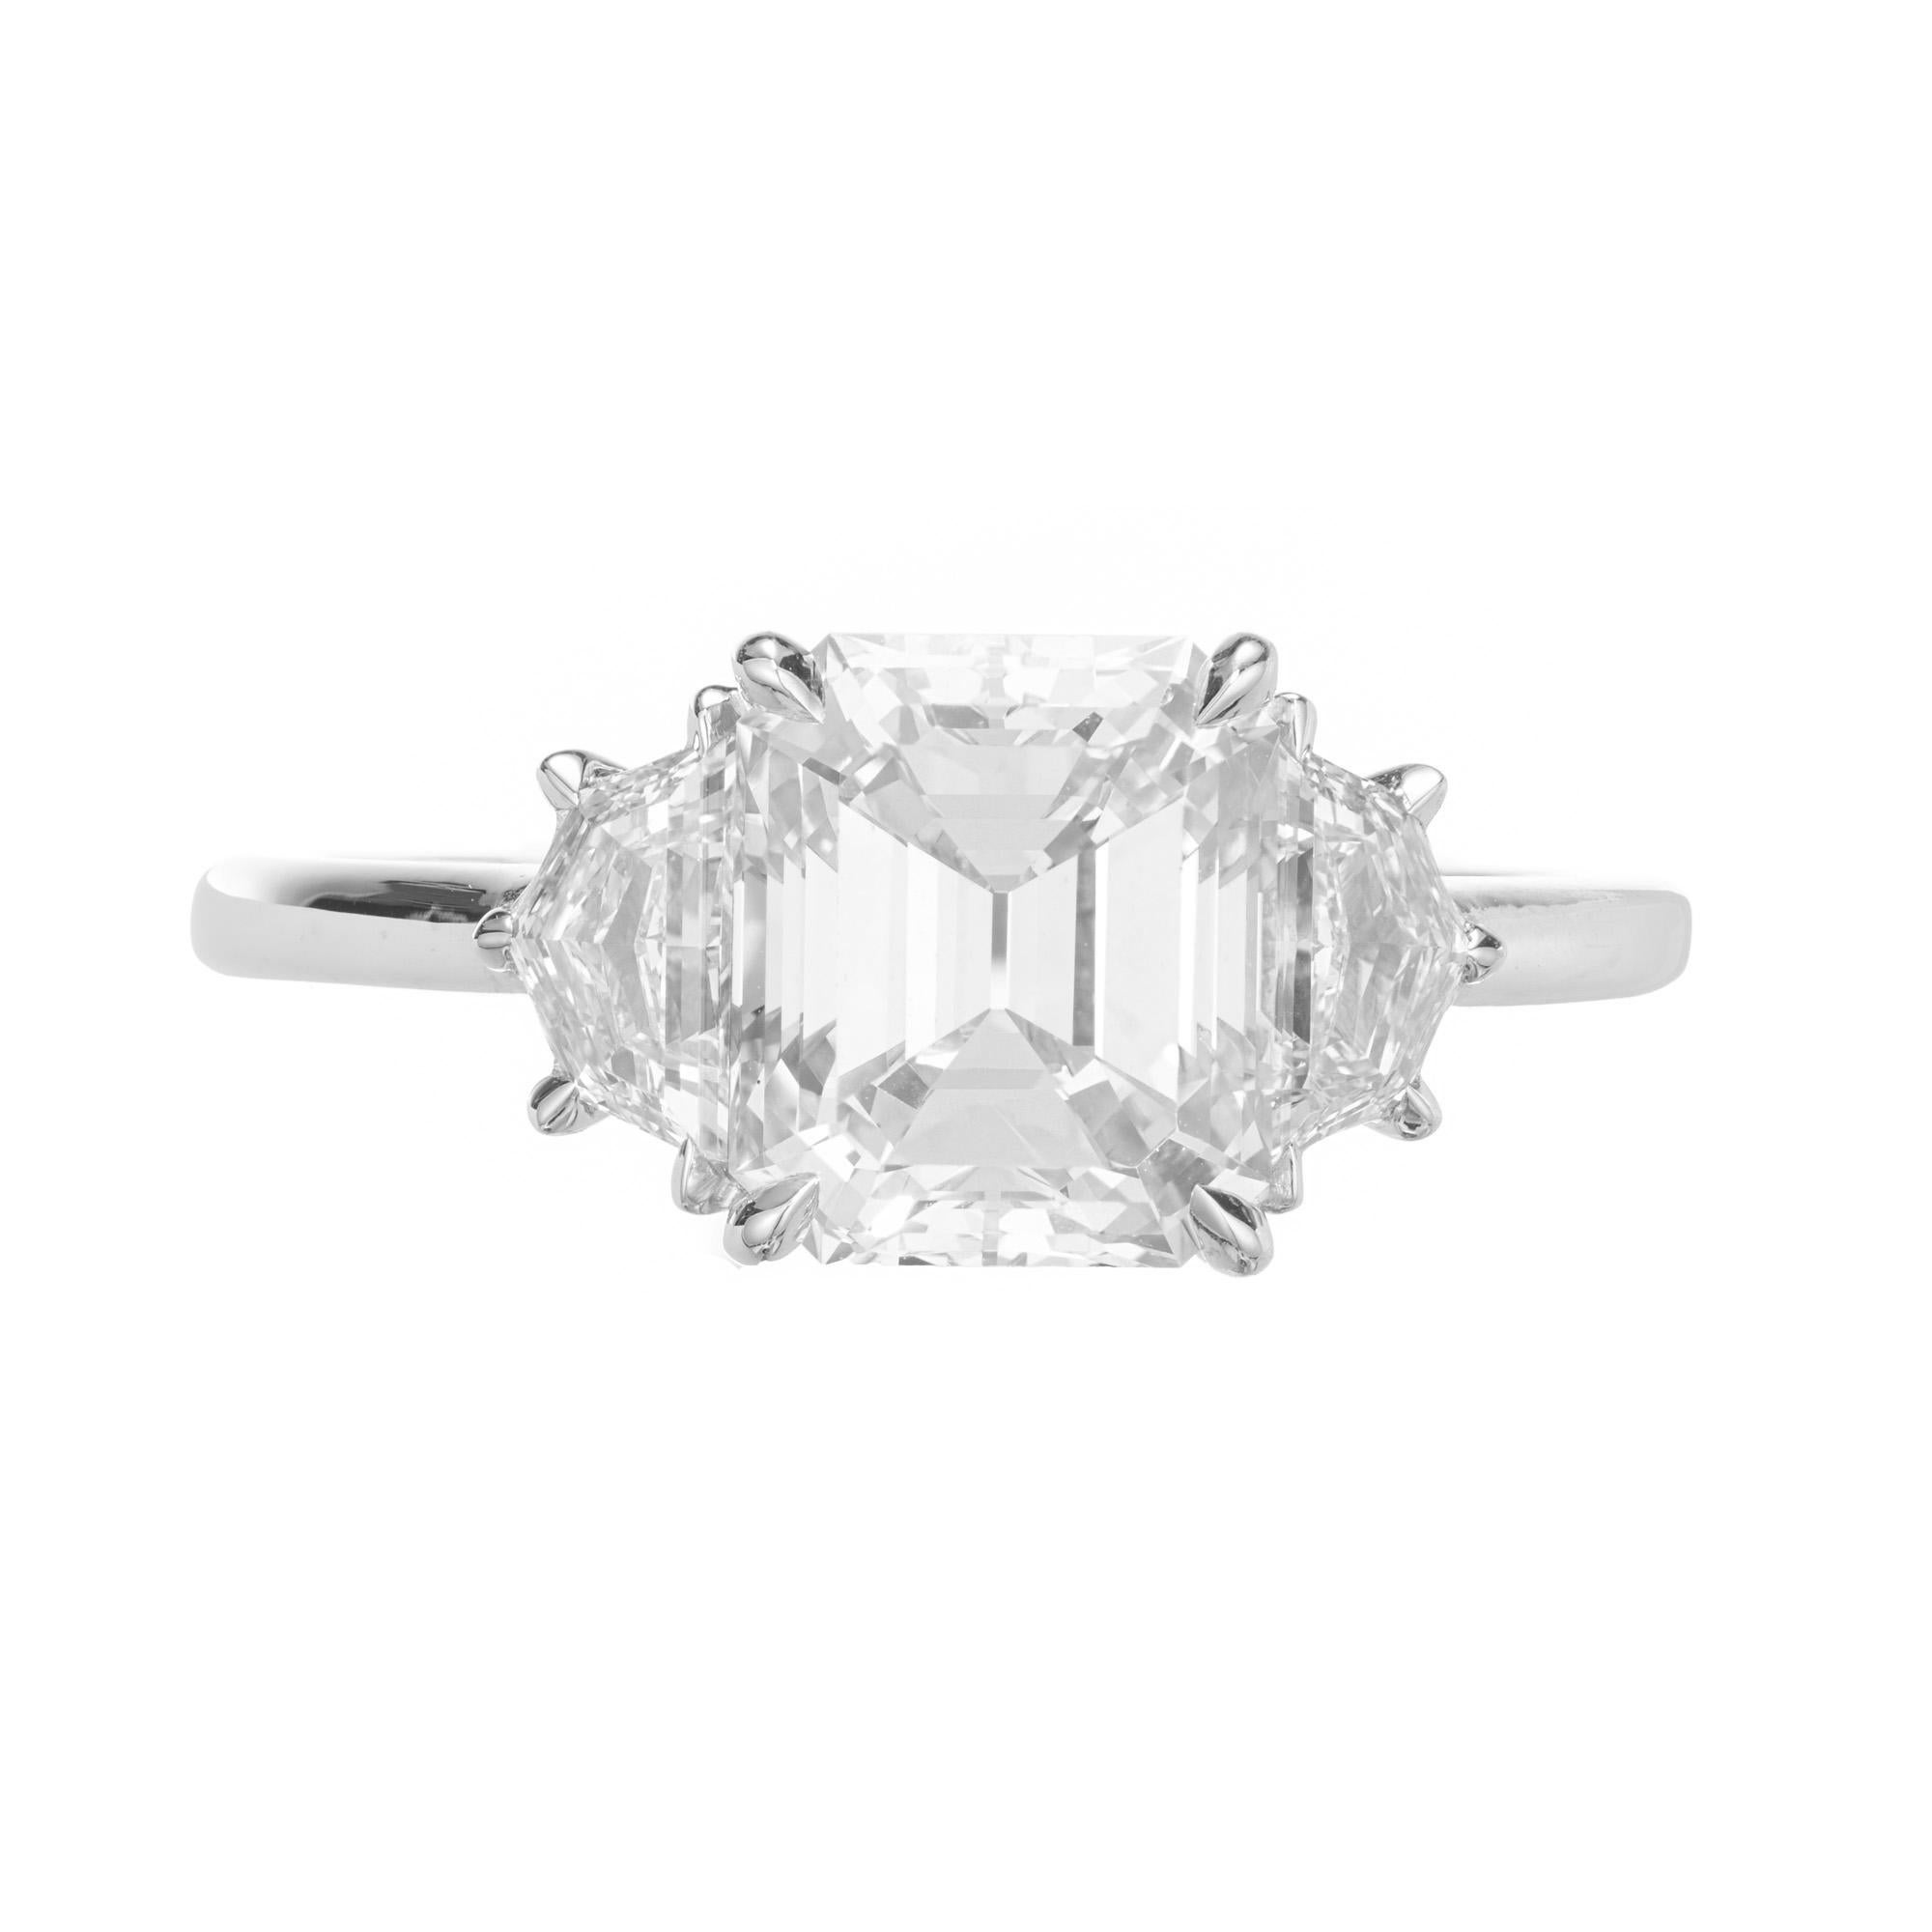 Original Art Deco emerald cut diamond with distinct asscher style influence in the cut corners, small table and raised crown causing a bright look.  The center diamond was --->>>>

1 emerald cut diamond, I VS approx. 2.32cts GIA Certificate #